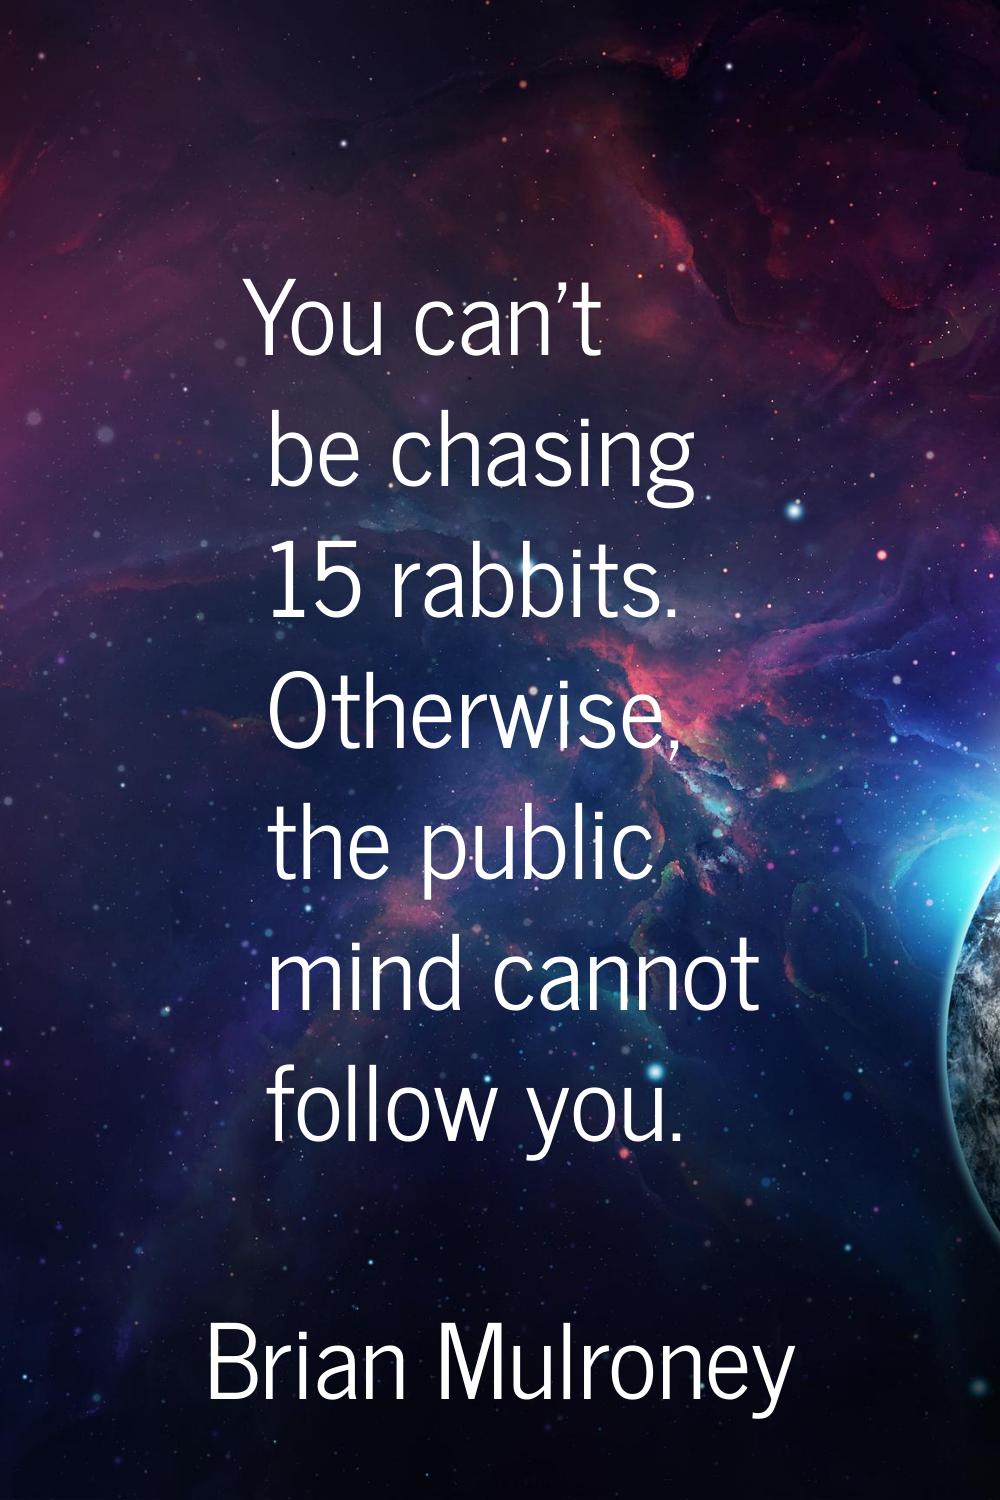 You can't be chasing 15 rabbits. Otherwise, the public mind cannot follow you.